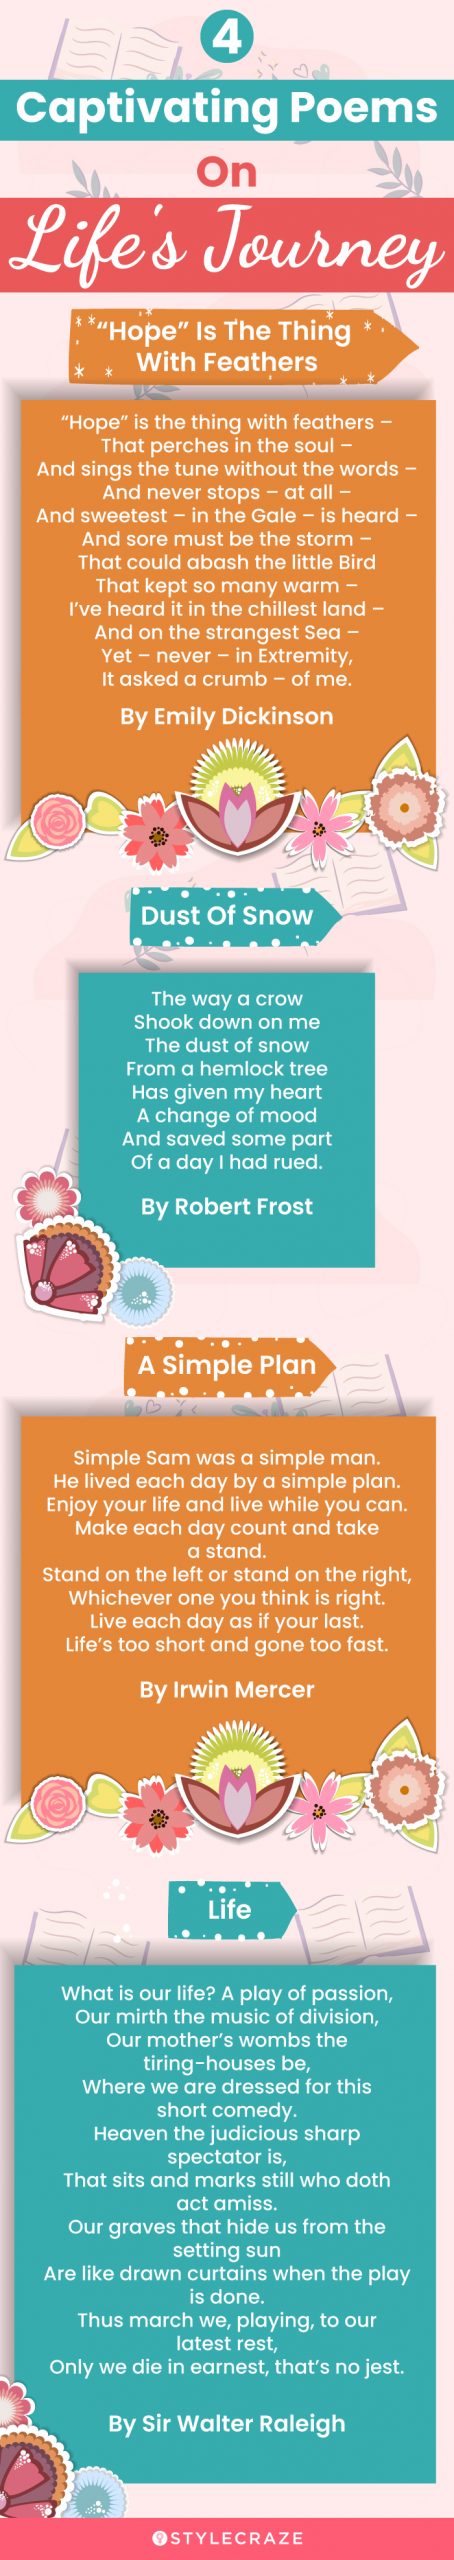 4 captivating poems on life's journey (infographic)